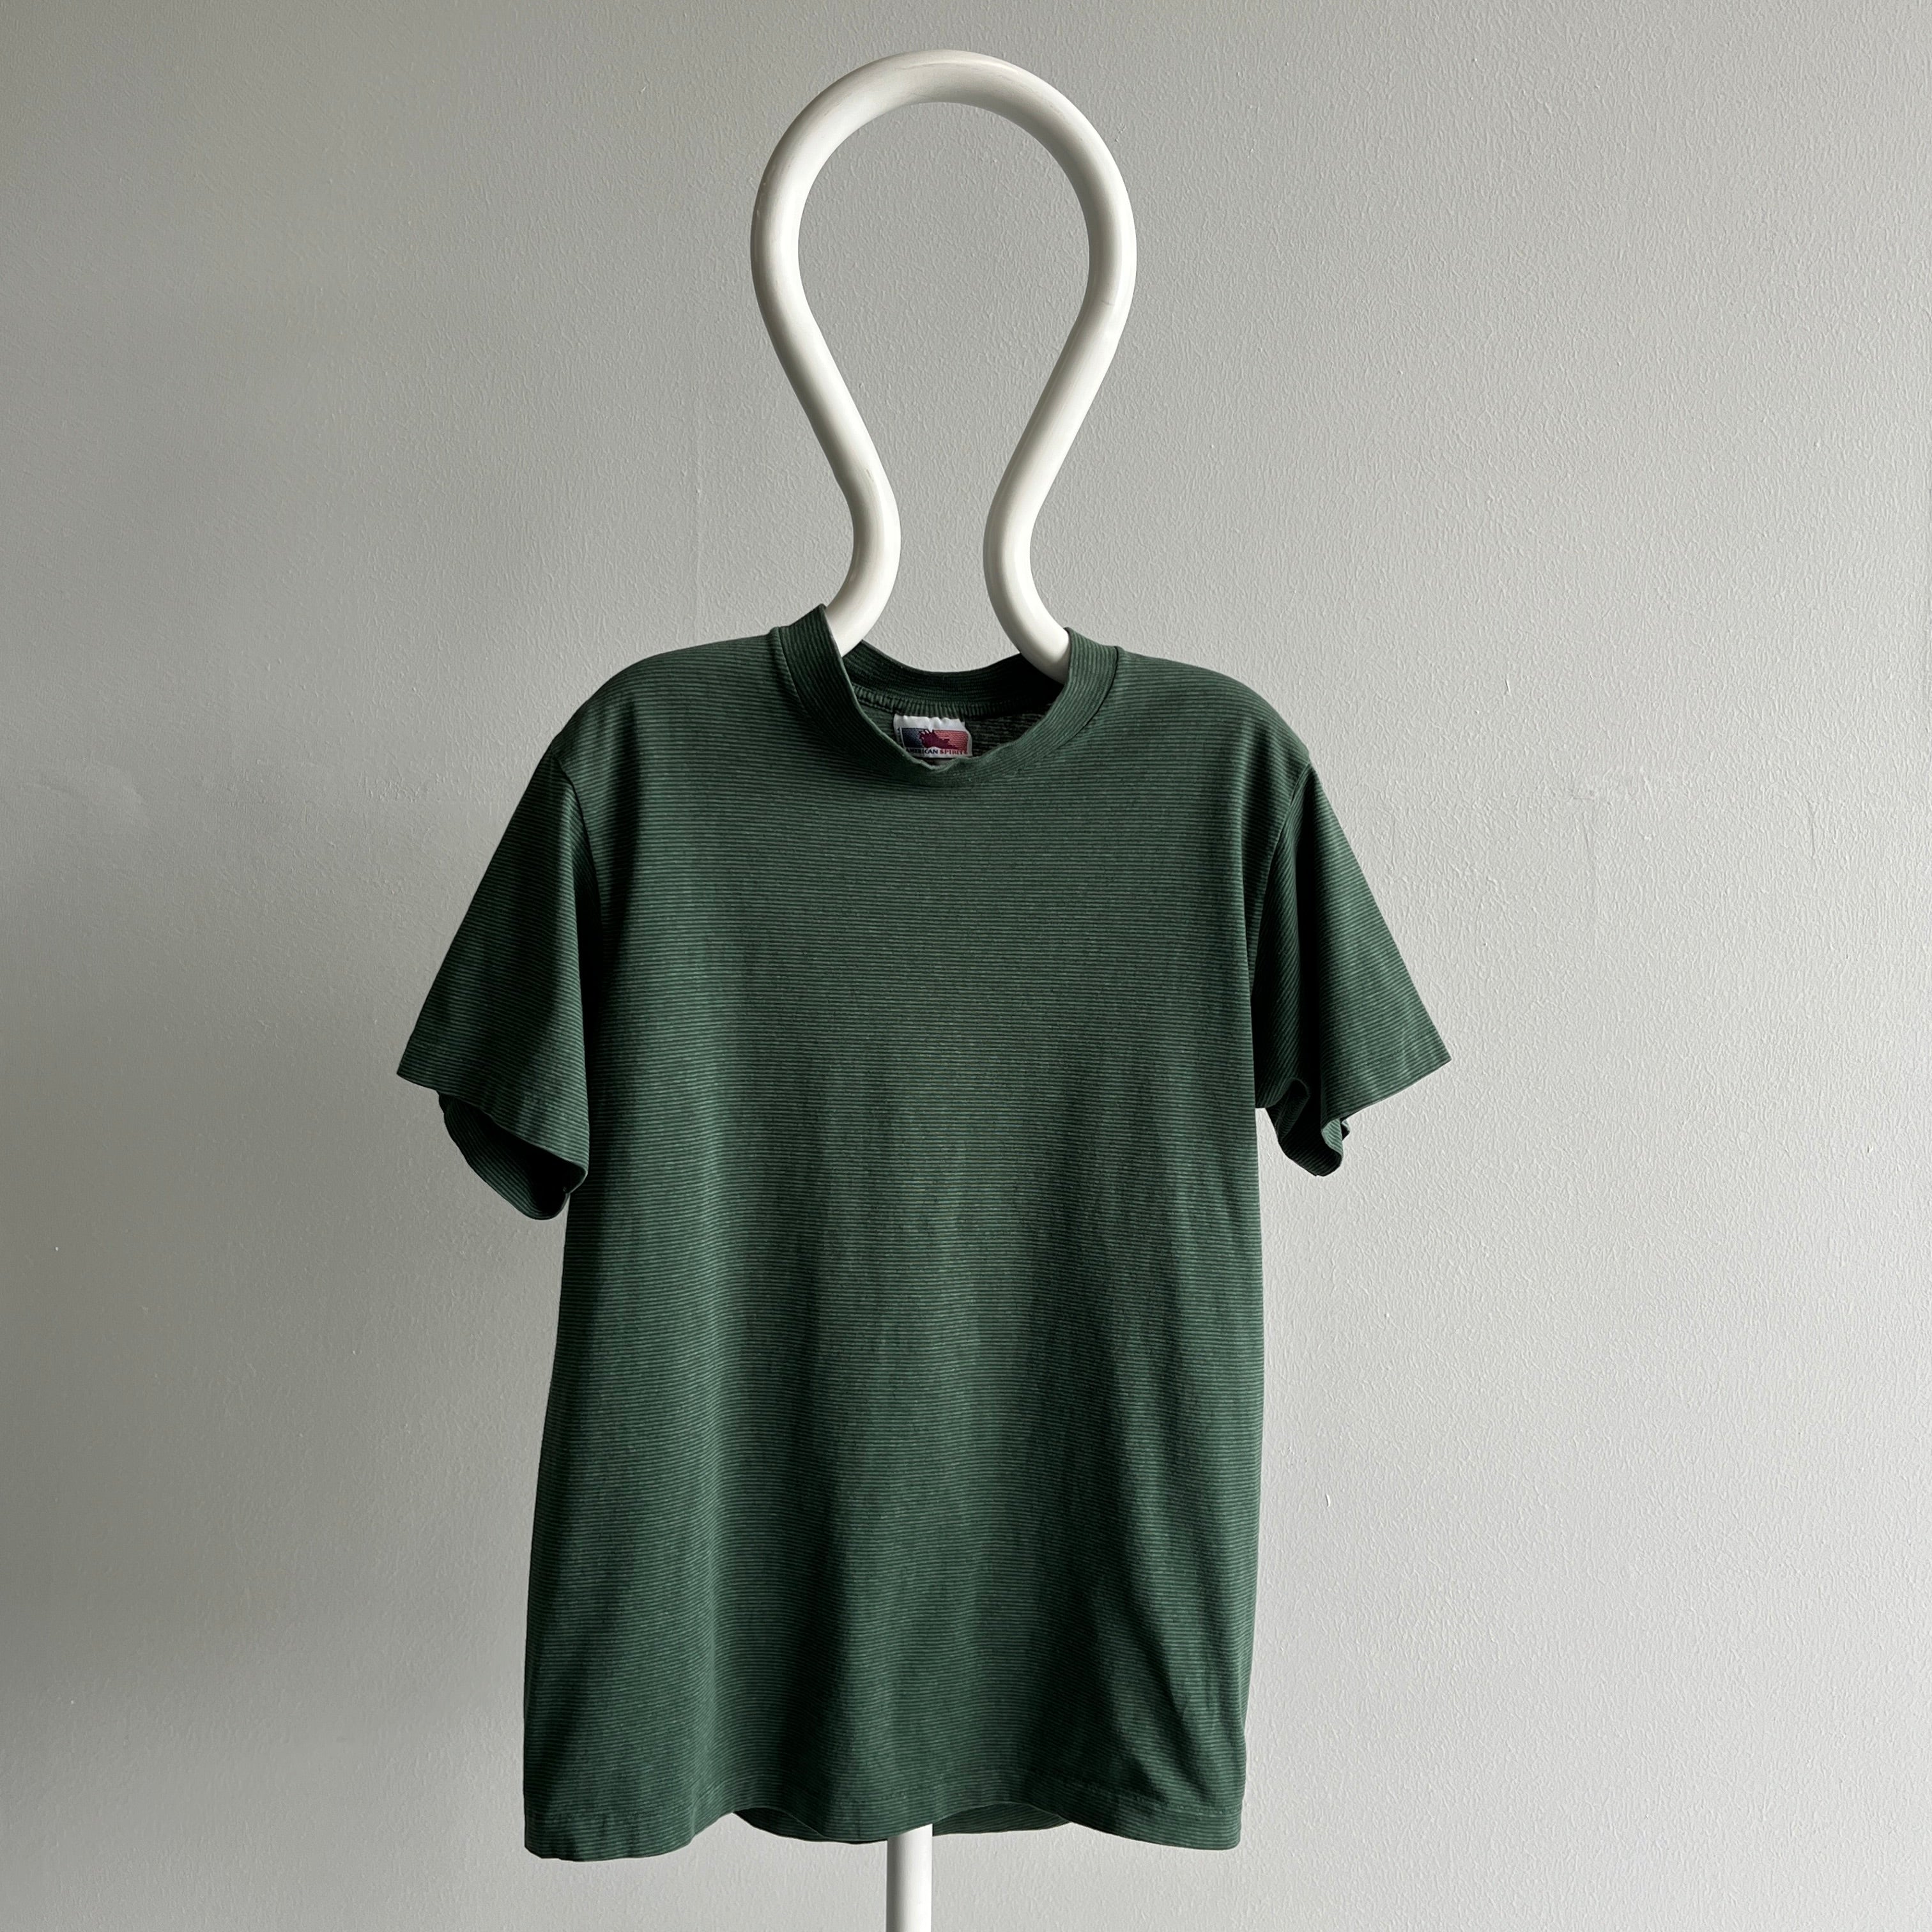 1980s Dark and Light Forest Green Pinstriped Cotton T-Shirt